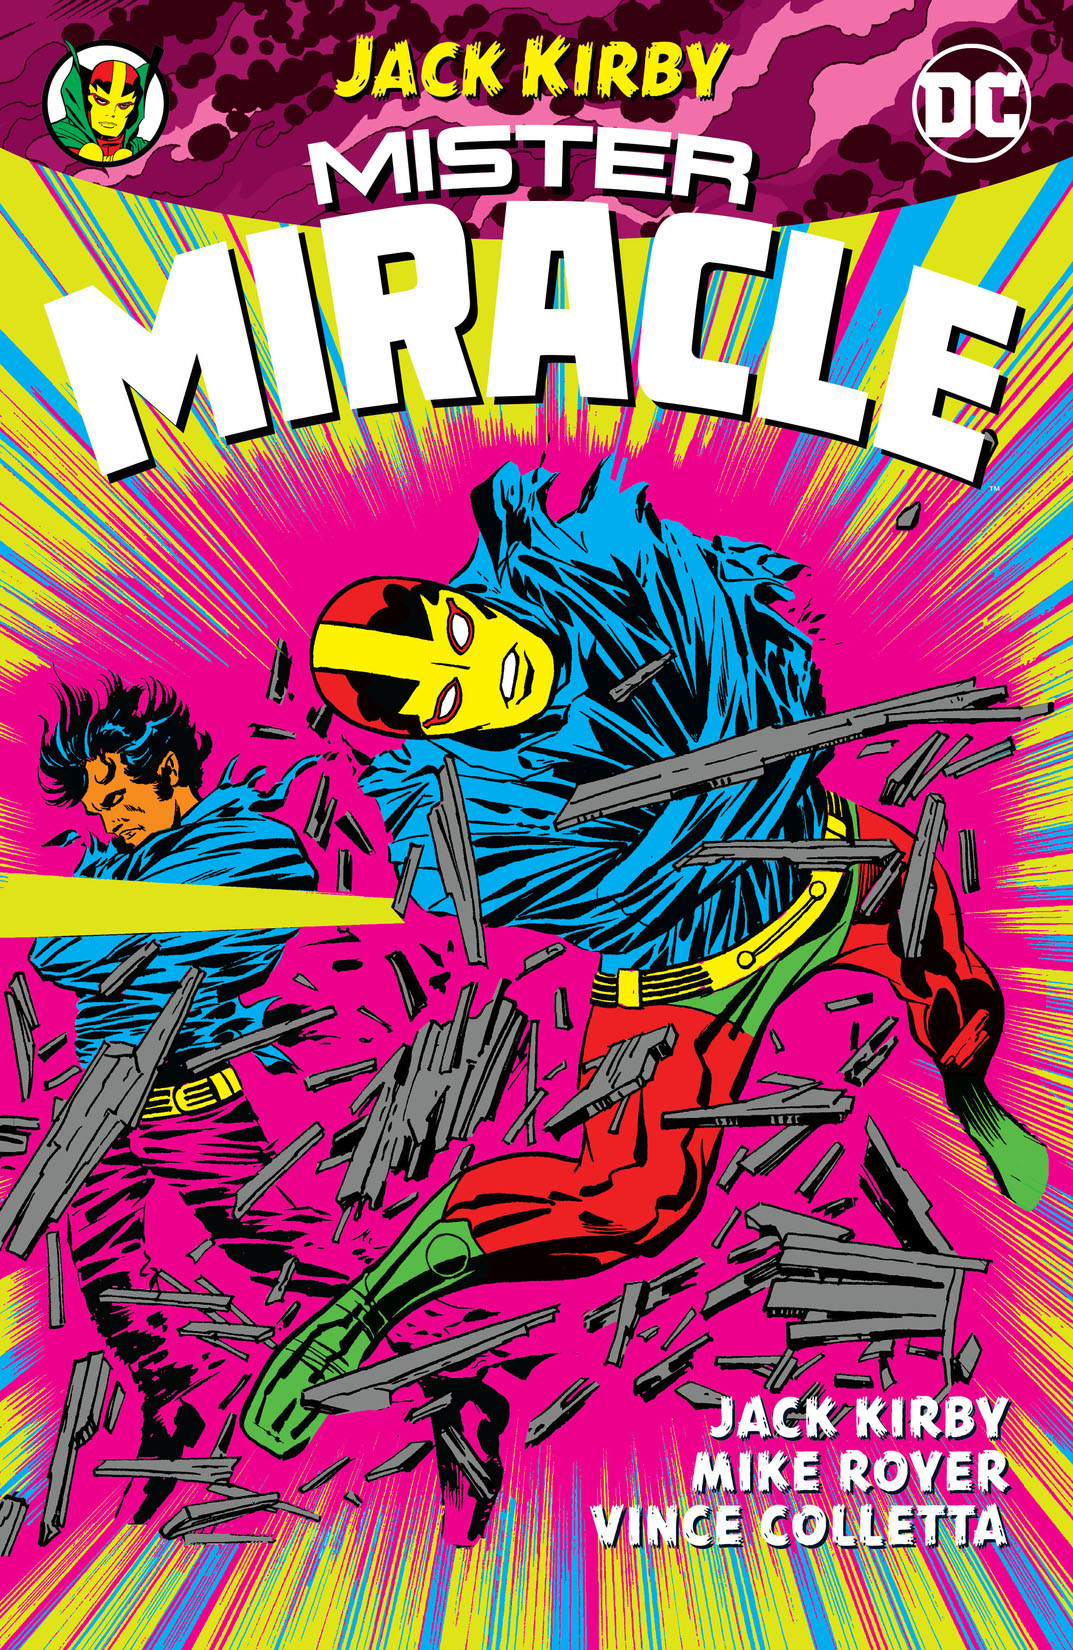 Mister Miracle by Jack Kirby preview images